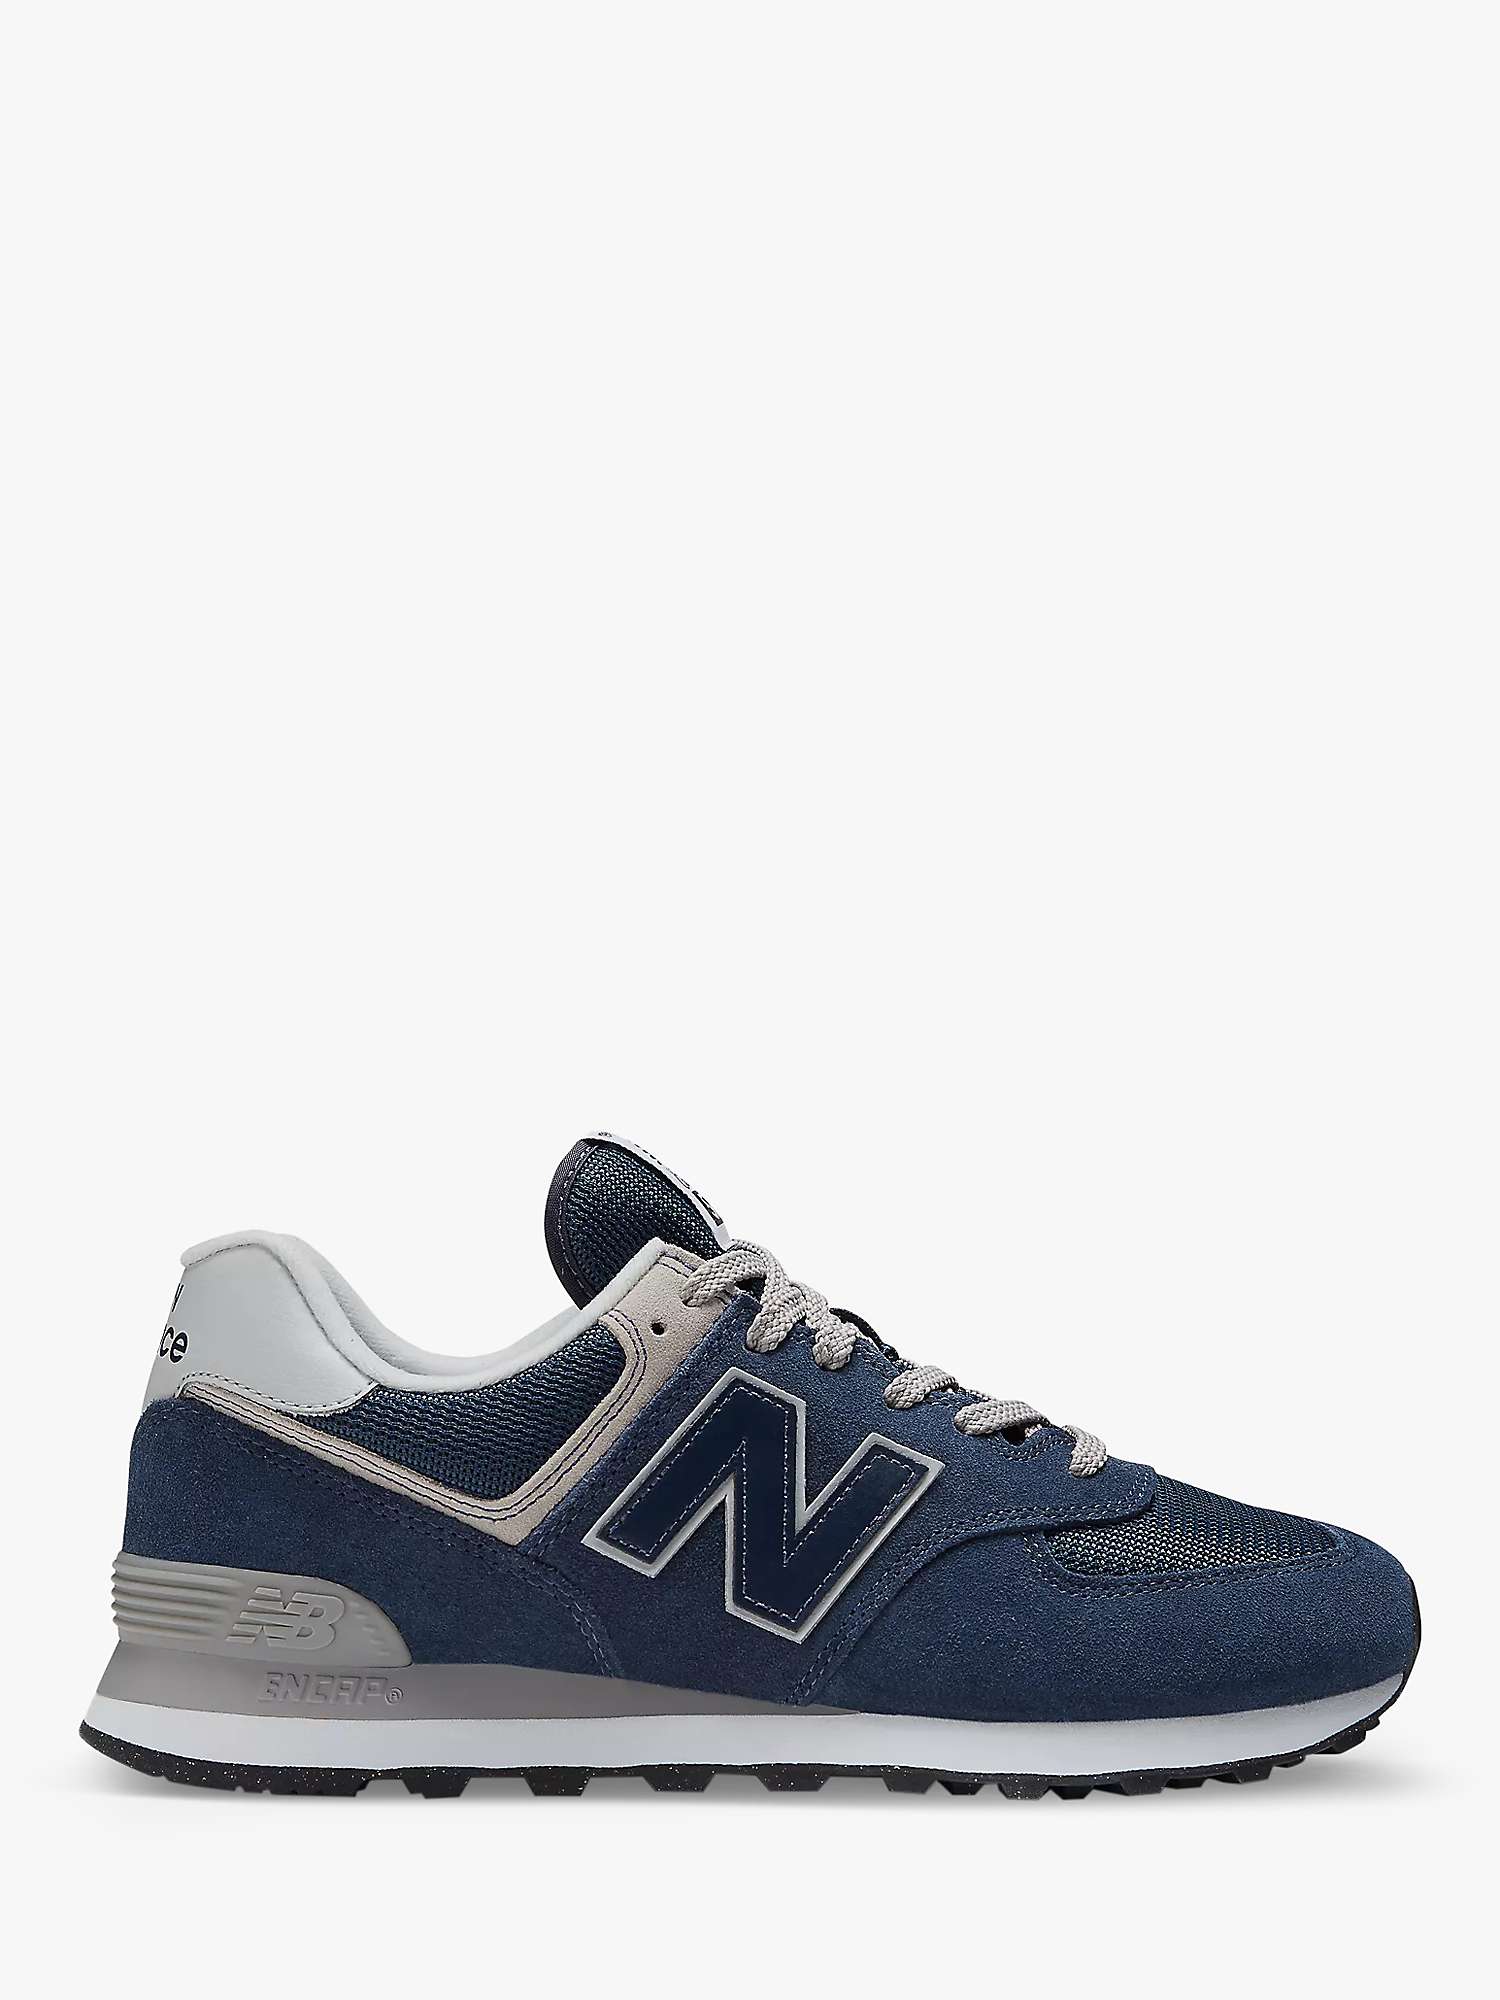 New Balance 574 Suede Trainers, Navy/White at John Lewis & Partners